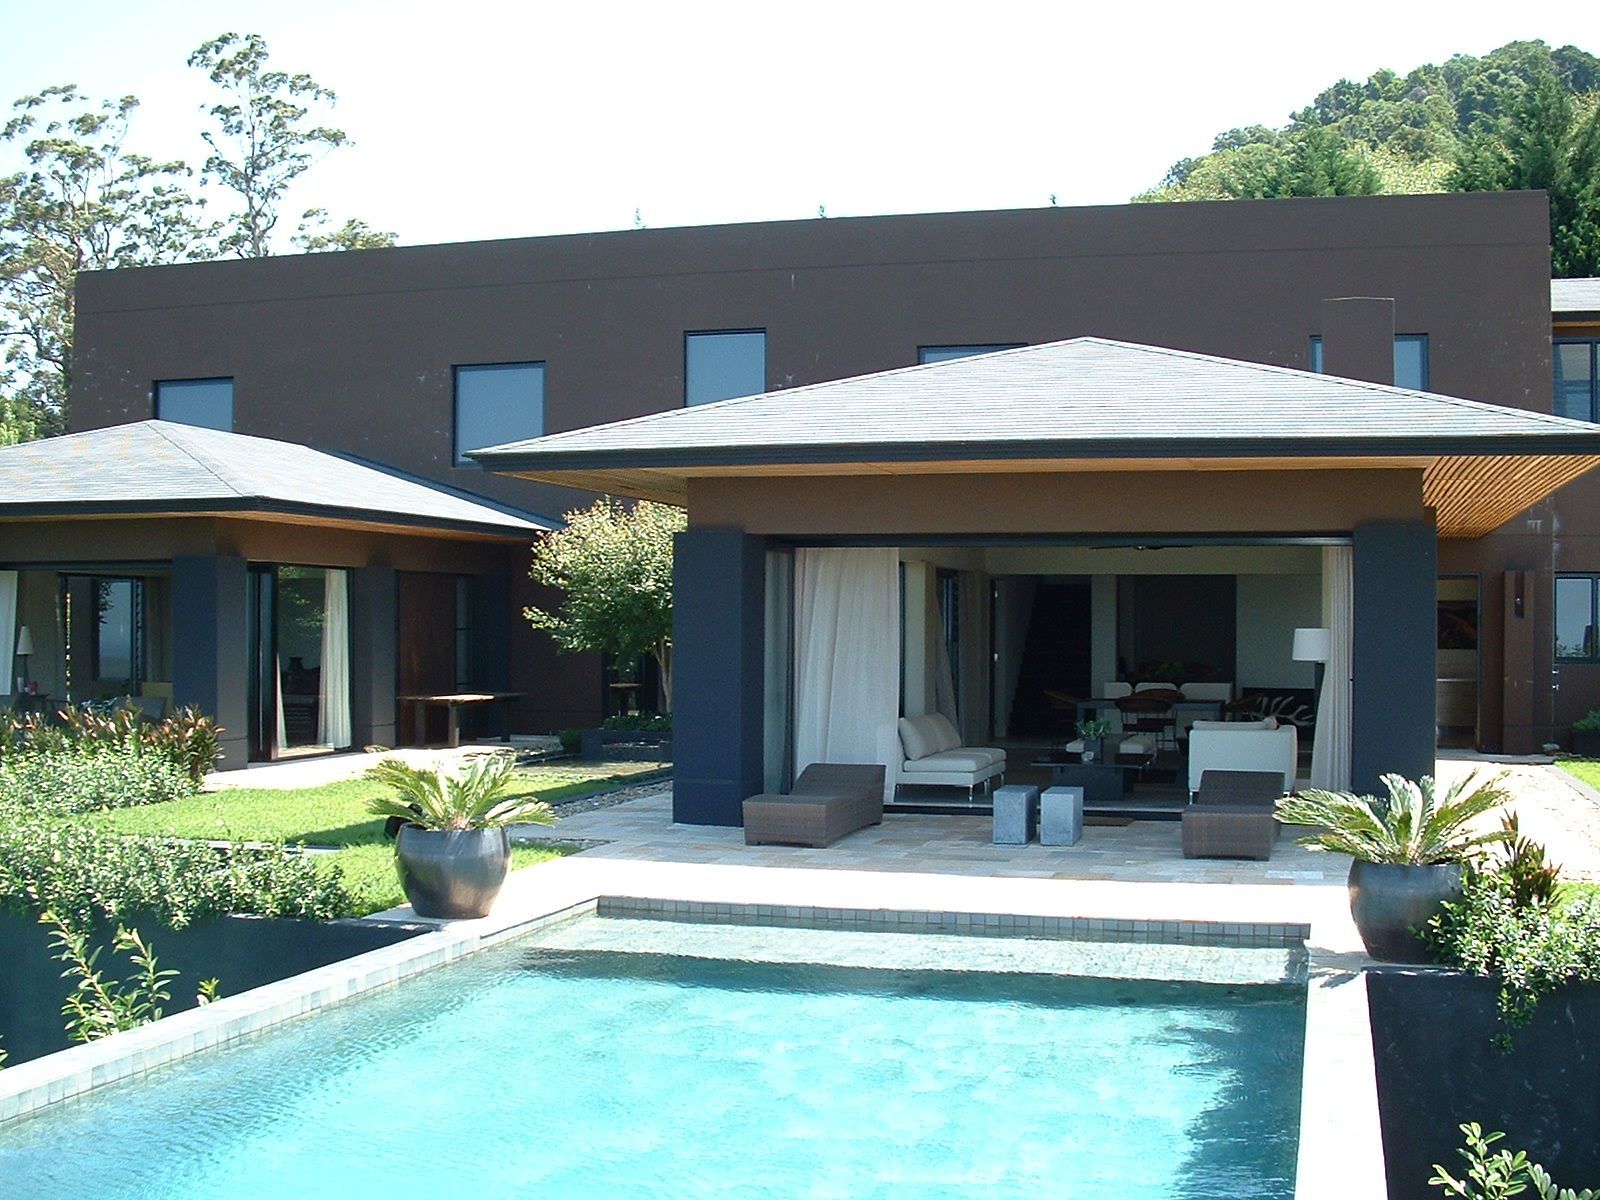 Big house with pool in it— Previous Projects in South Nowra, NSW